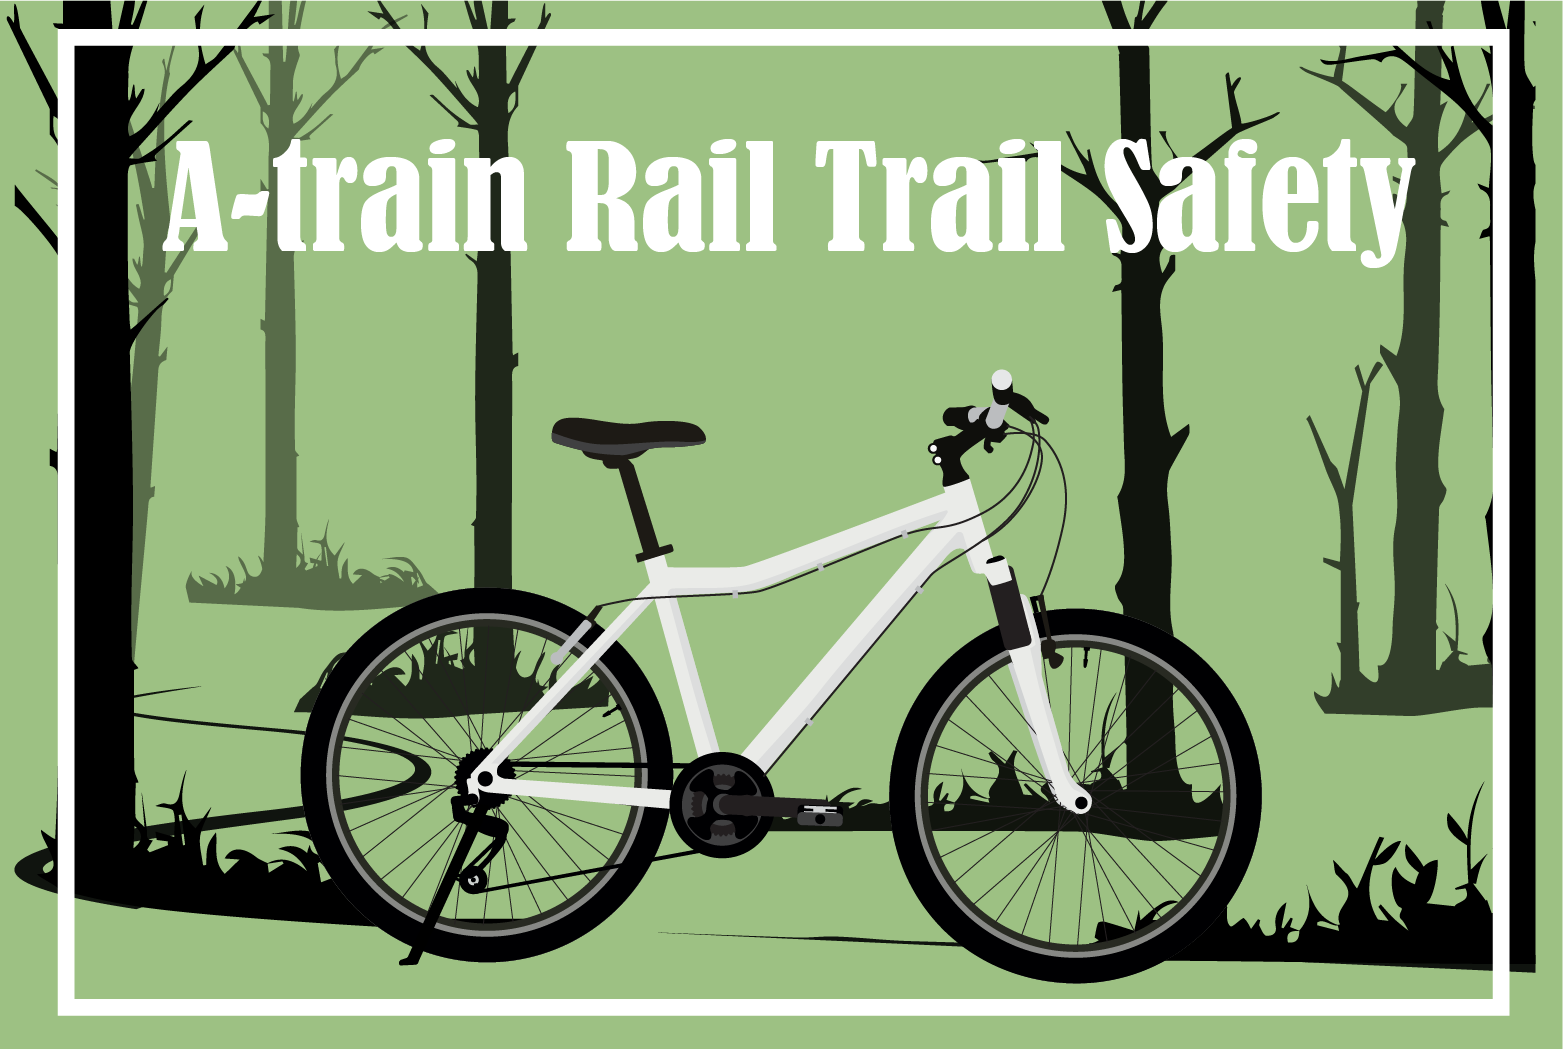 Your Safety Guide for DCTA’s A-train Rail Trail